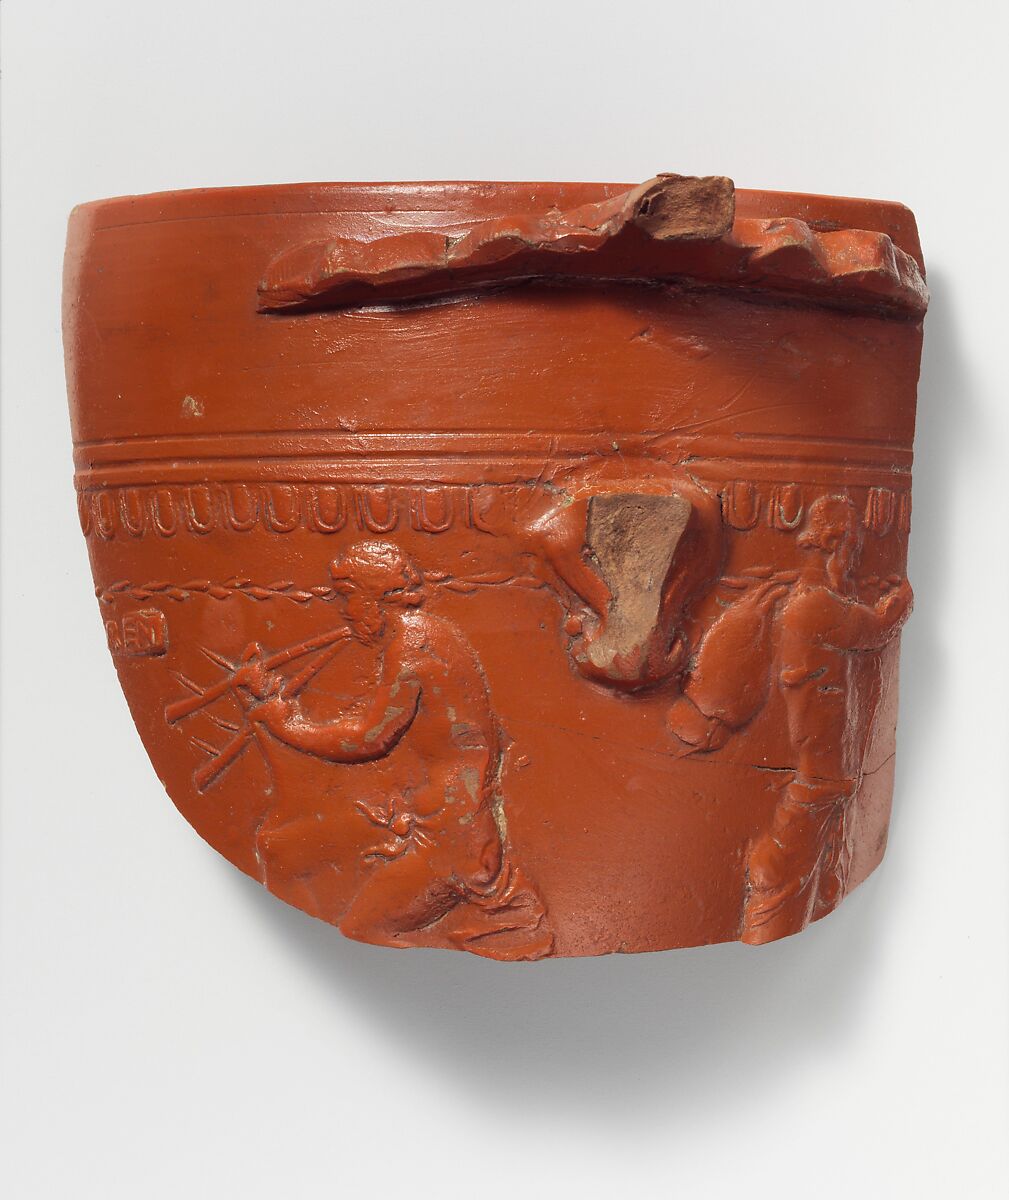 Terracotta fragment of an Arretine cup with satyrs, Signed by Perennius, Terracotta, Roman 